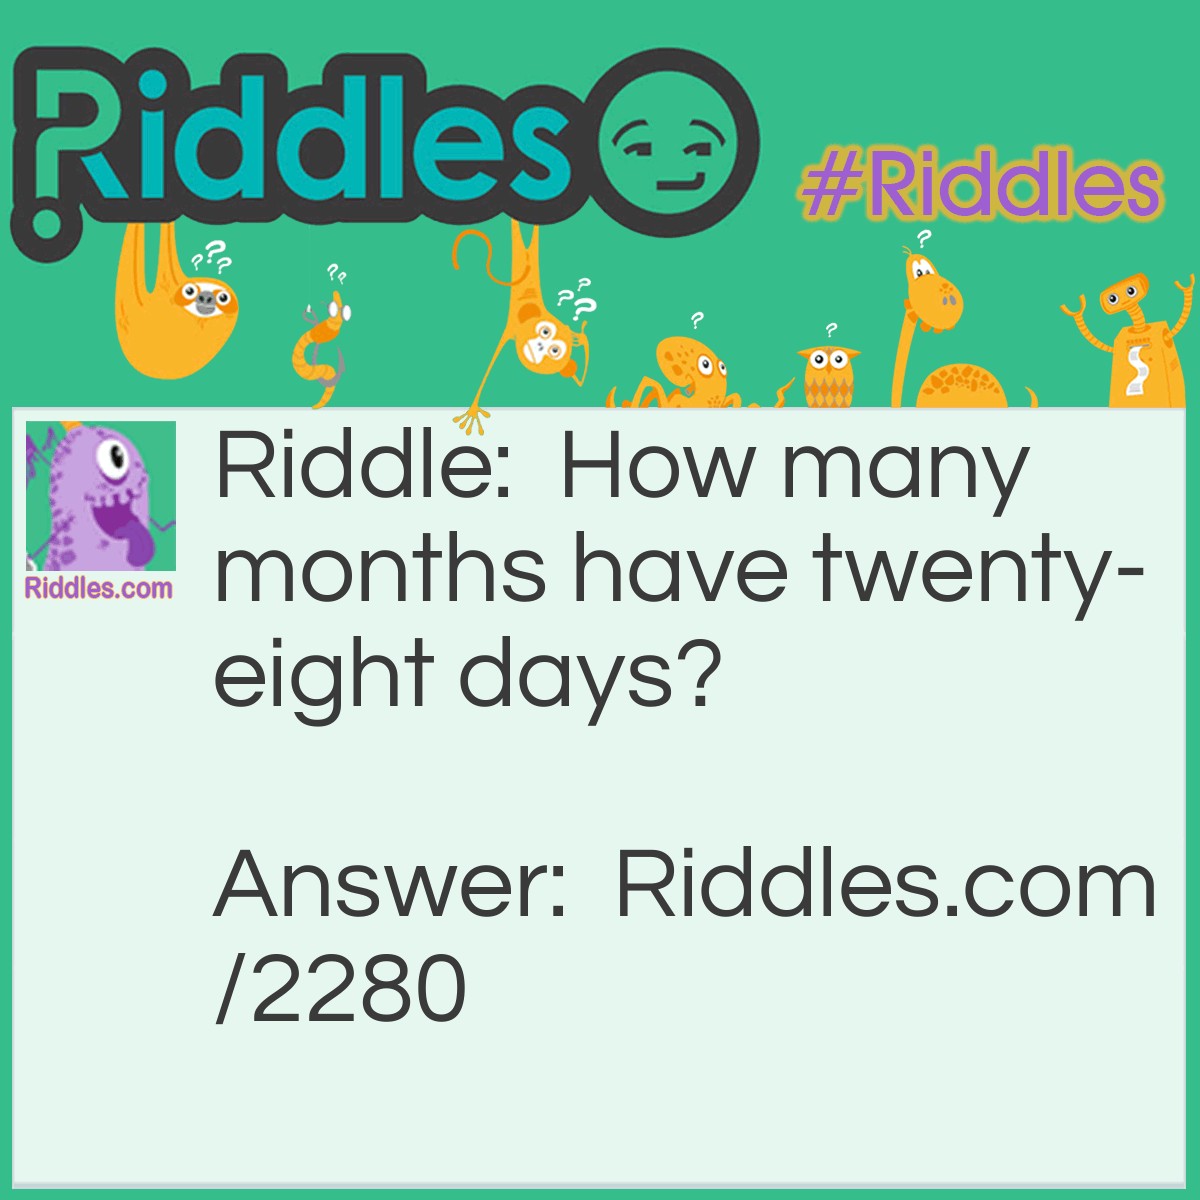 Riddle: How many months have twenty-eight days? Answer: All twelve months have 28 days.